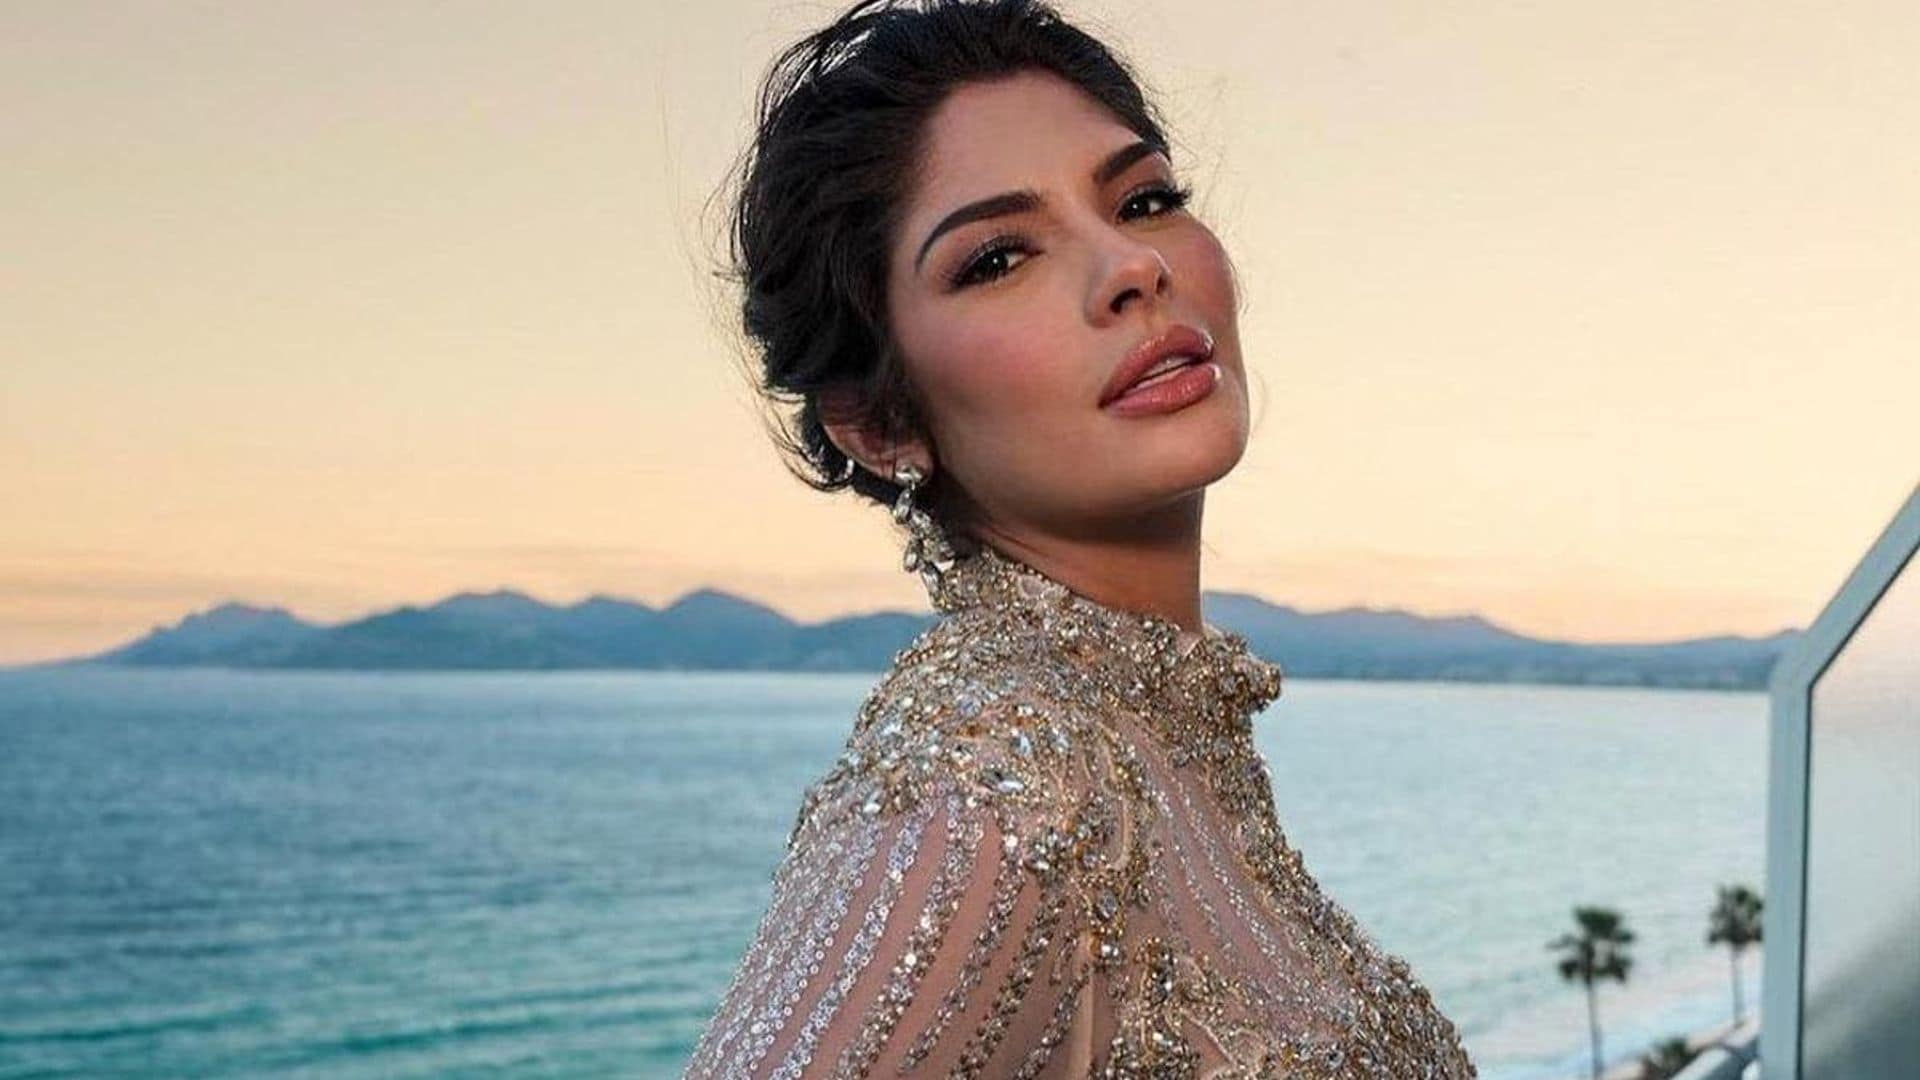 Sheyniss Palacios makes her Cannes debut with a ‘brilliant’ look